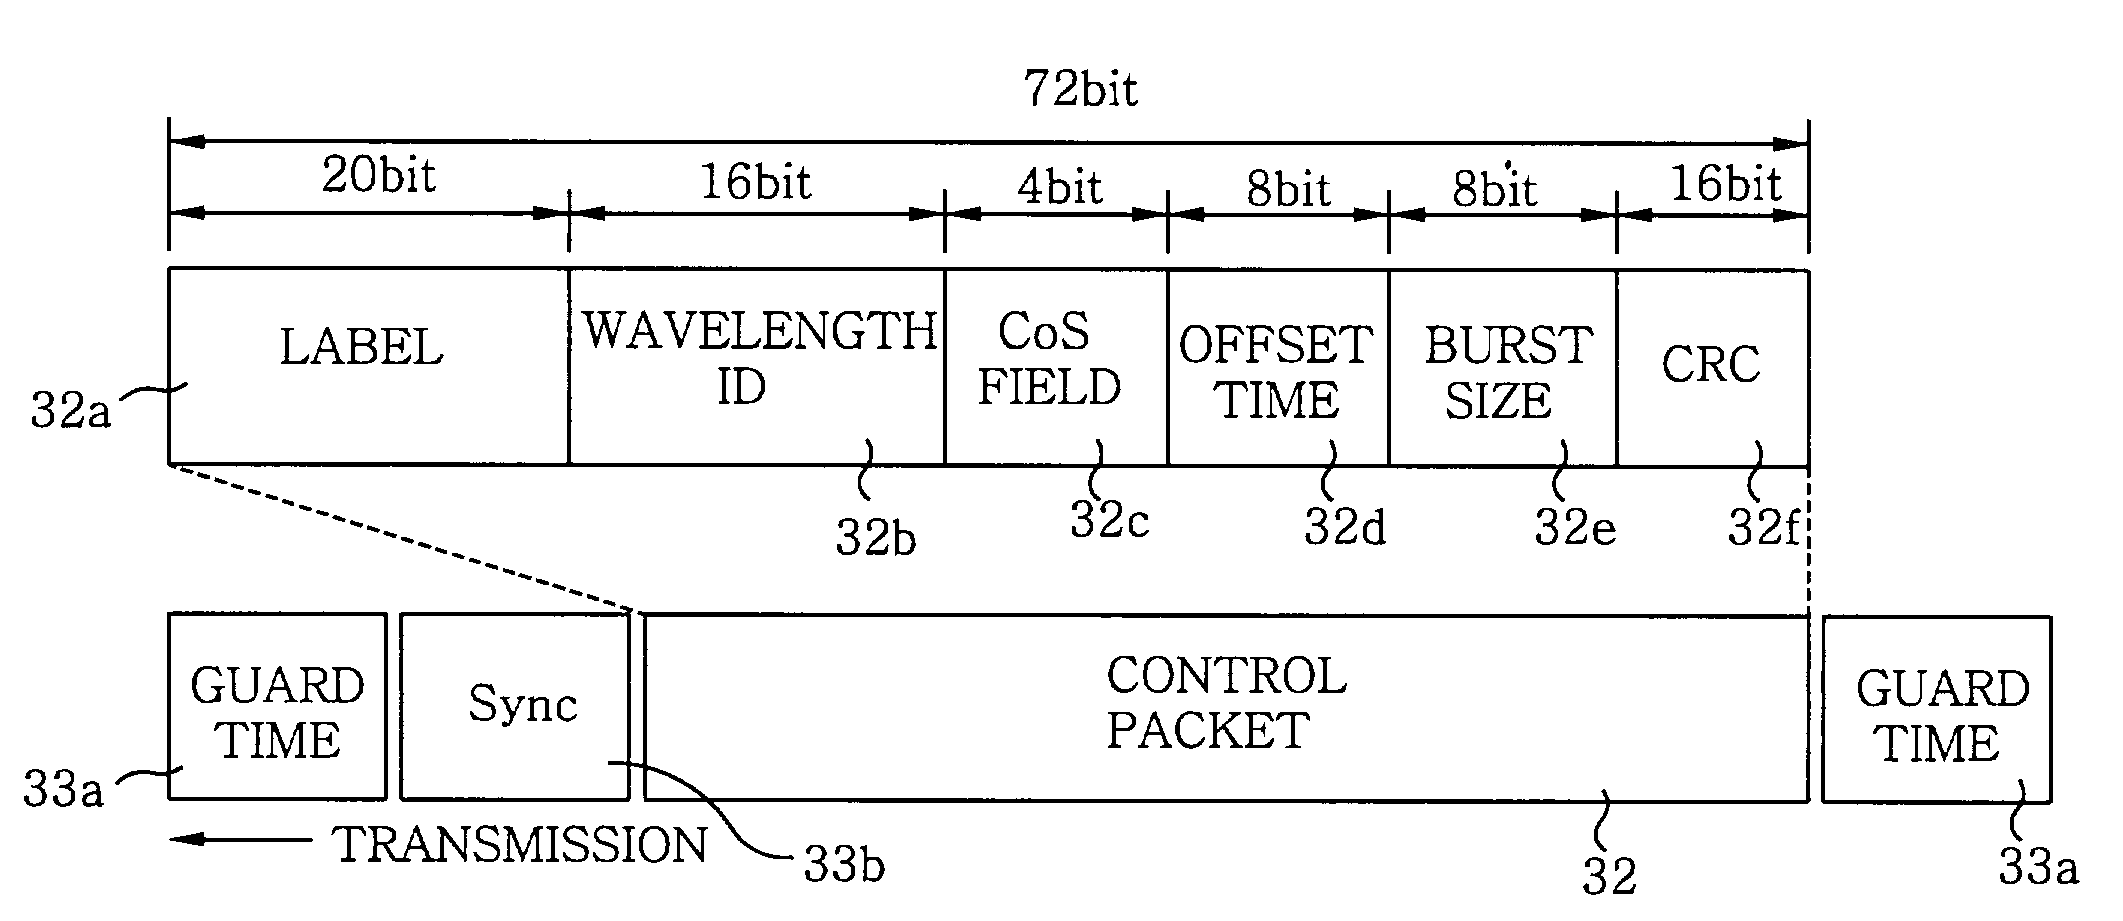 Control packet structure and method for generating a data burst in optical burst switching networks